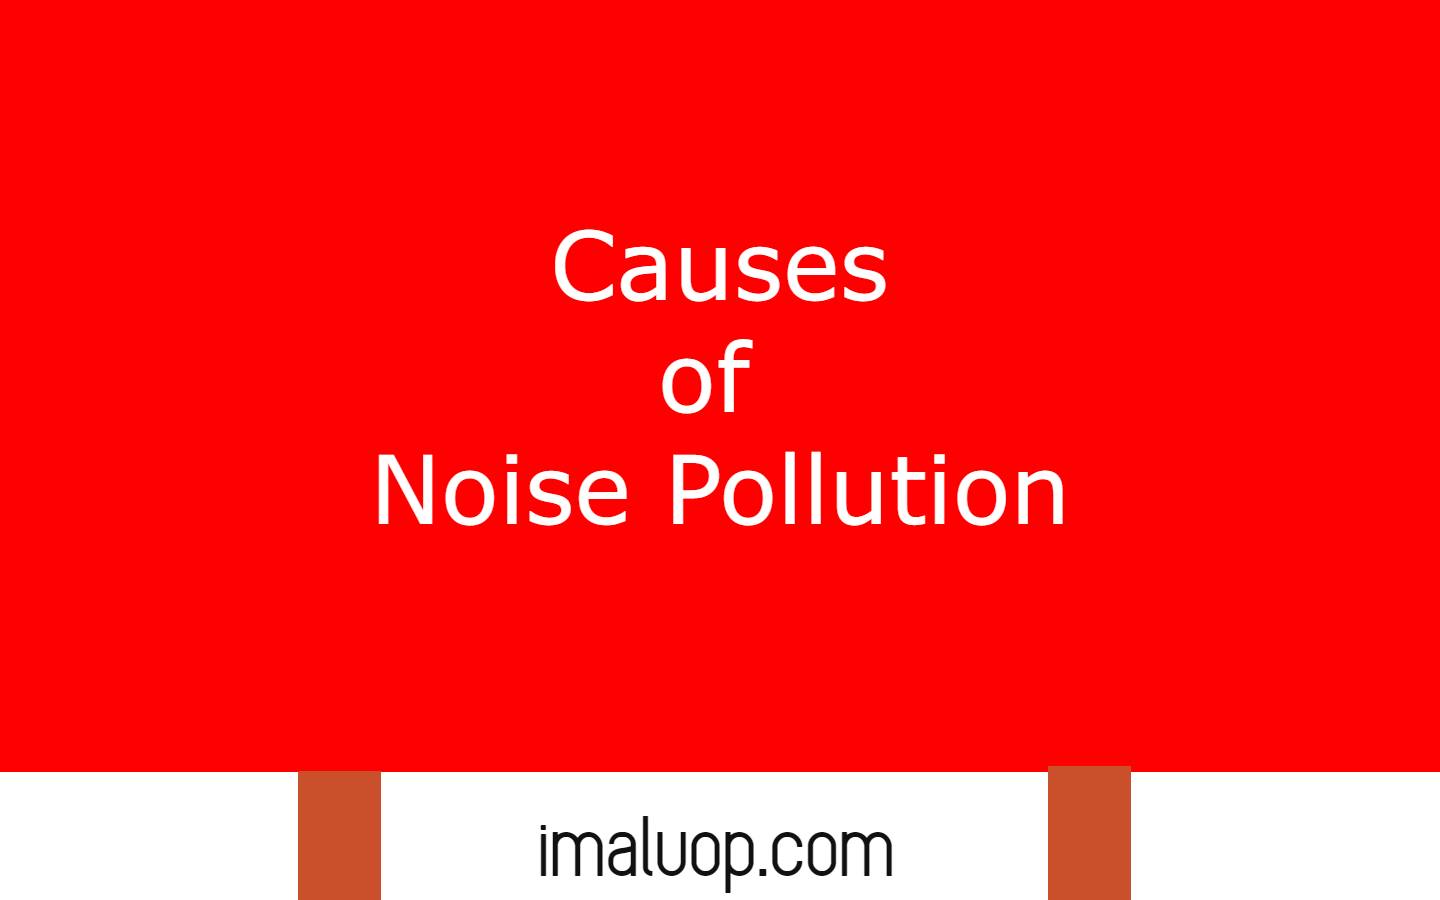 Causes of Noise Pollution